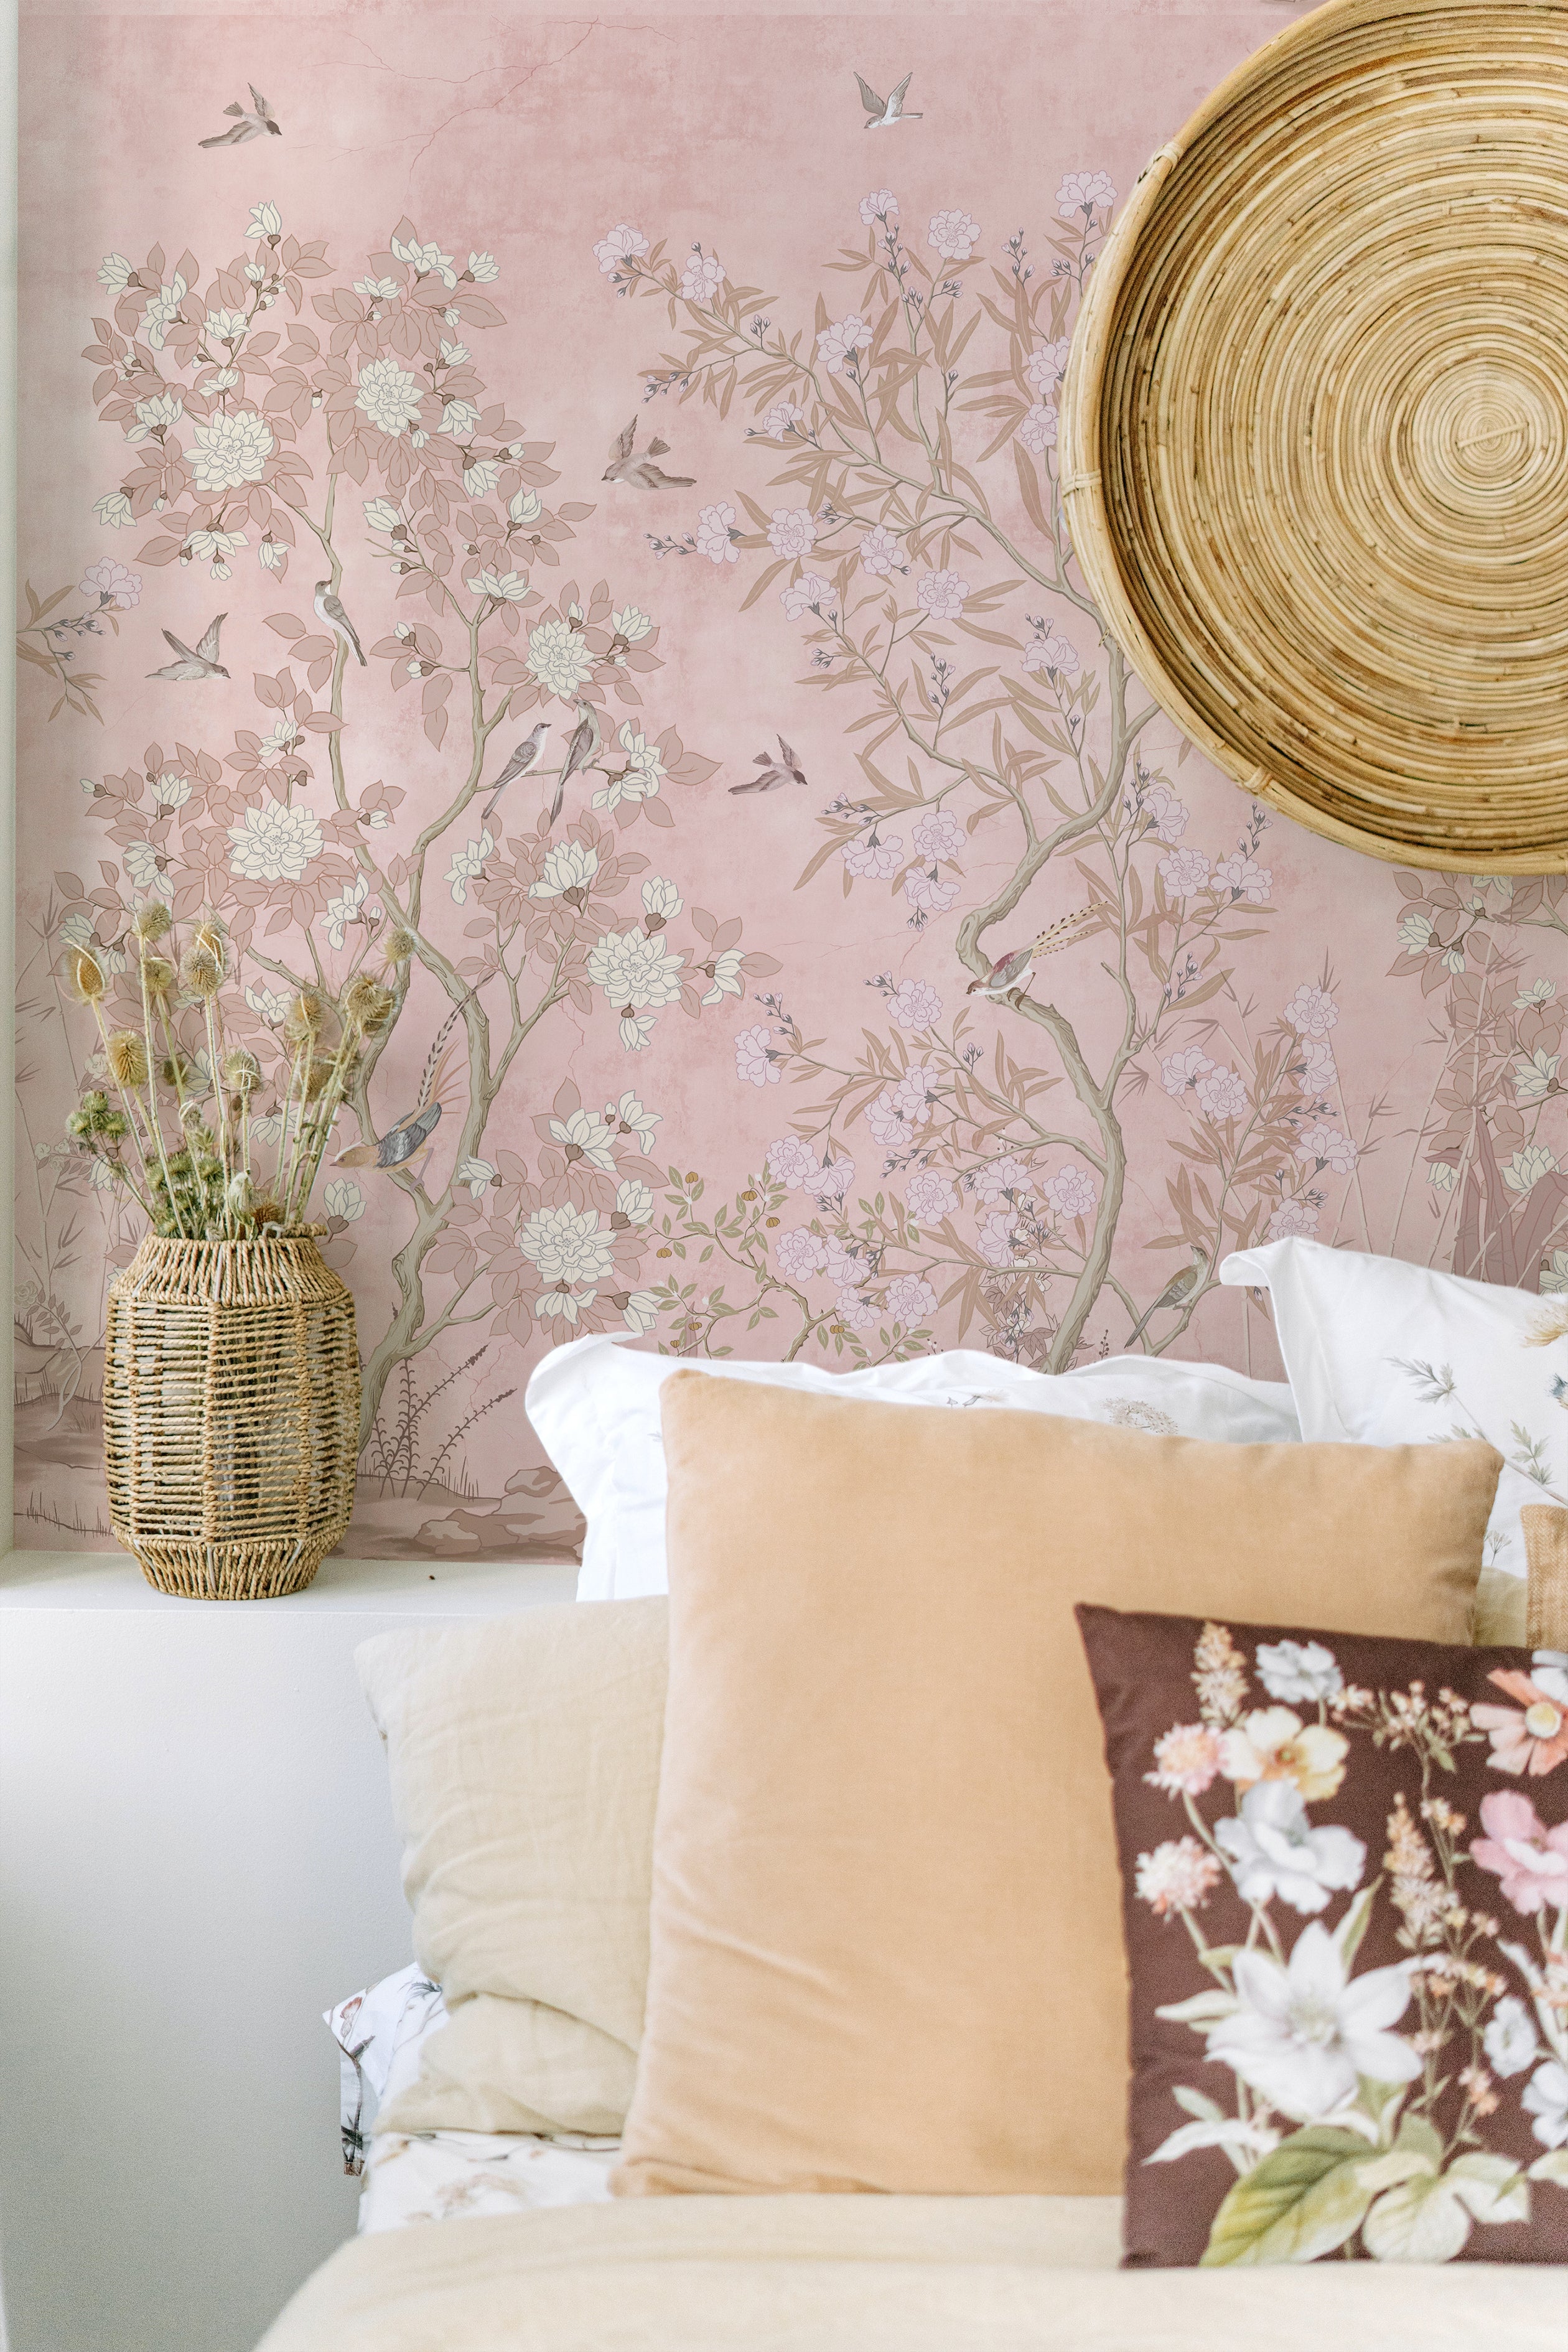 A close-up of chinoiserie wallpaper behind a bedroom scene, showing intricate details of the floral and avian pattern in muted colors on a blush pink background, complemented by a natural wicker headboard and accents like a large straw wall disc, fresh flowers in a basket, and soft-colored pillows